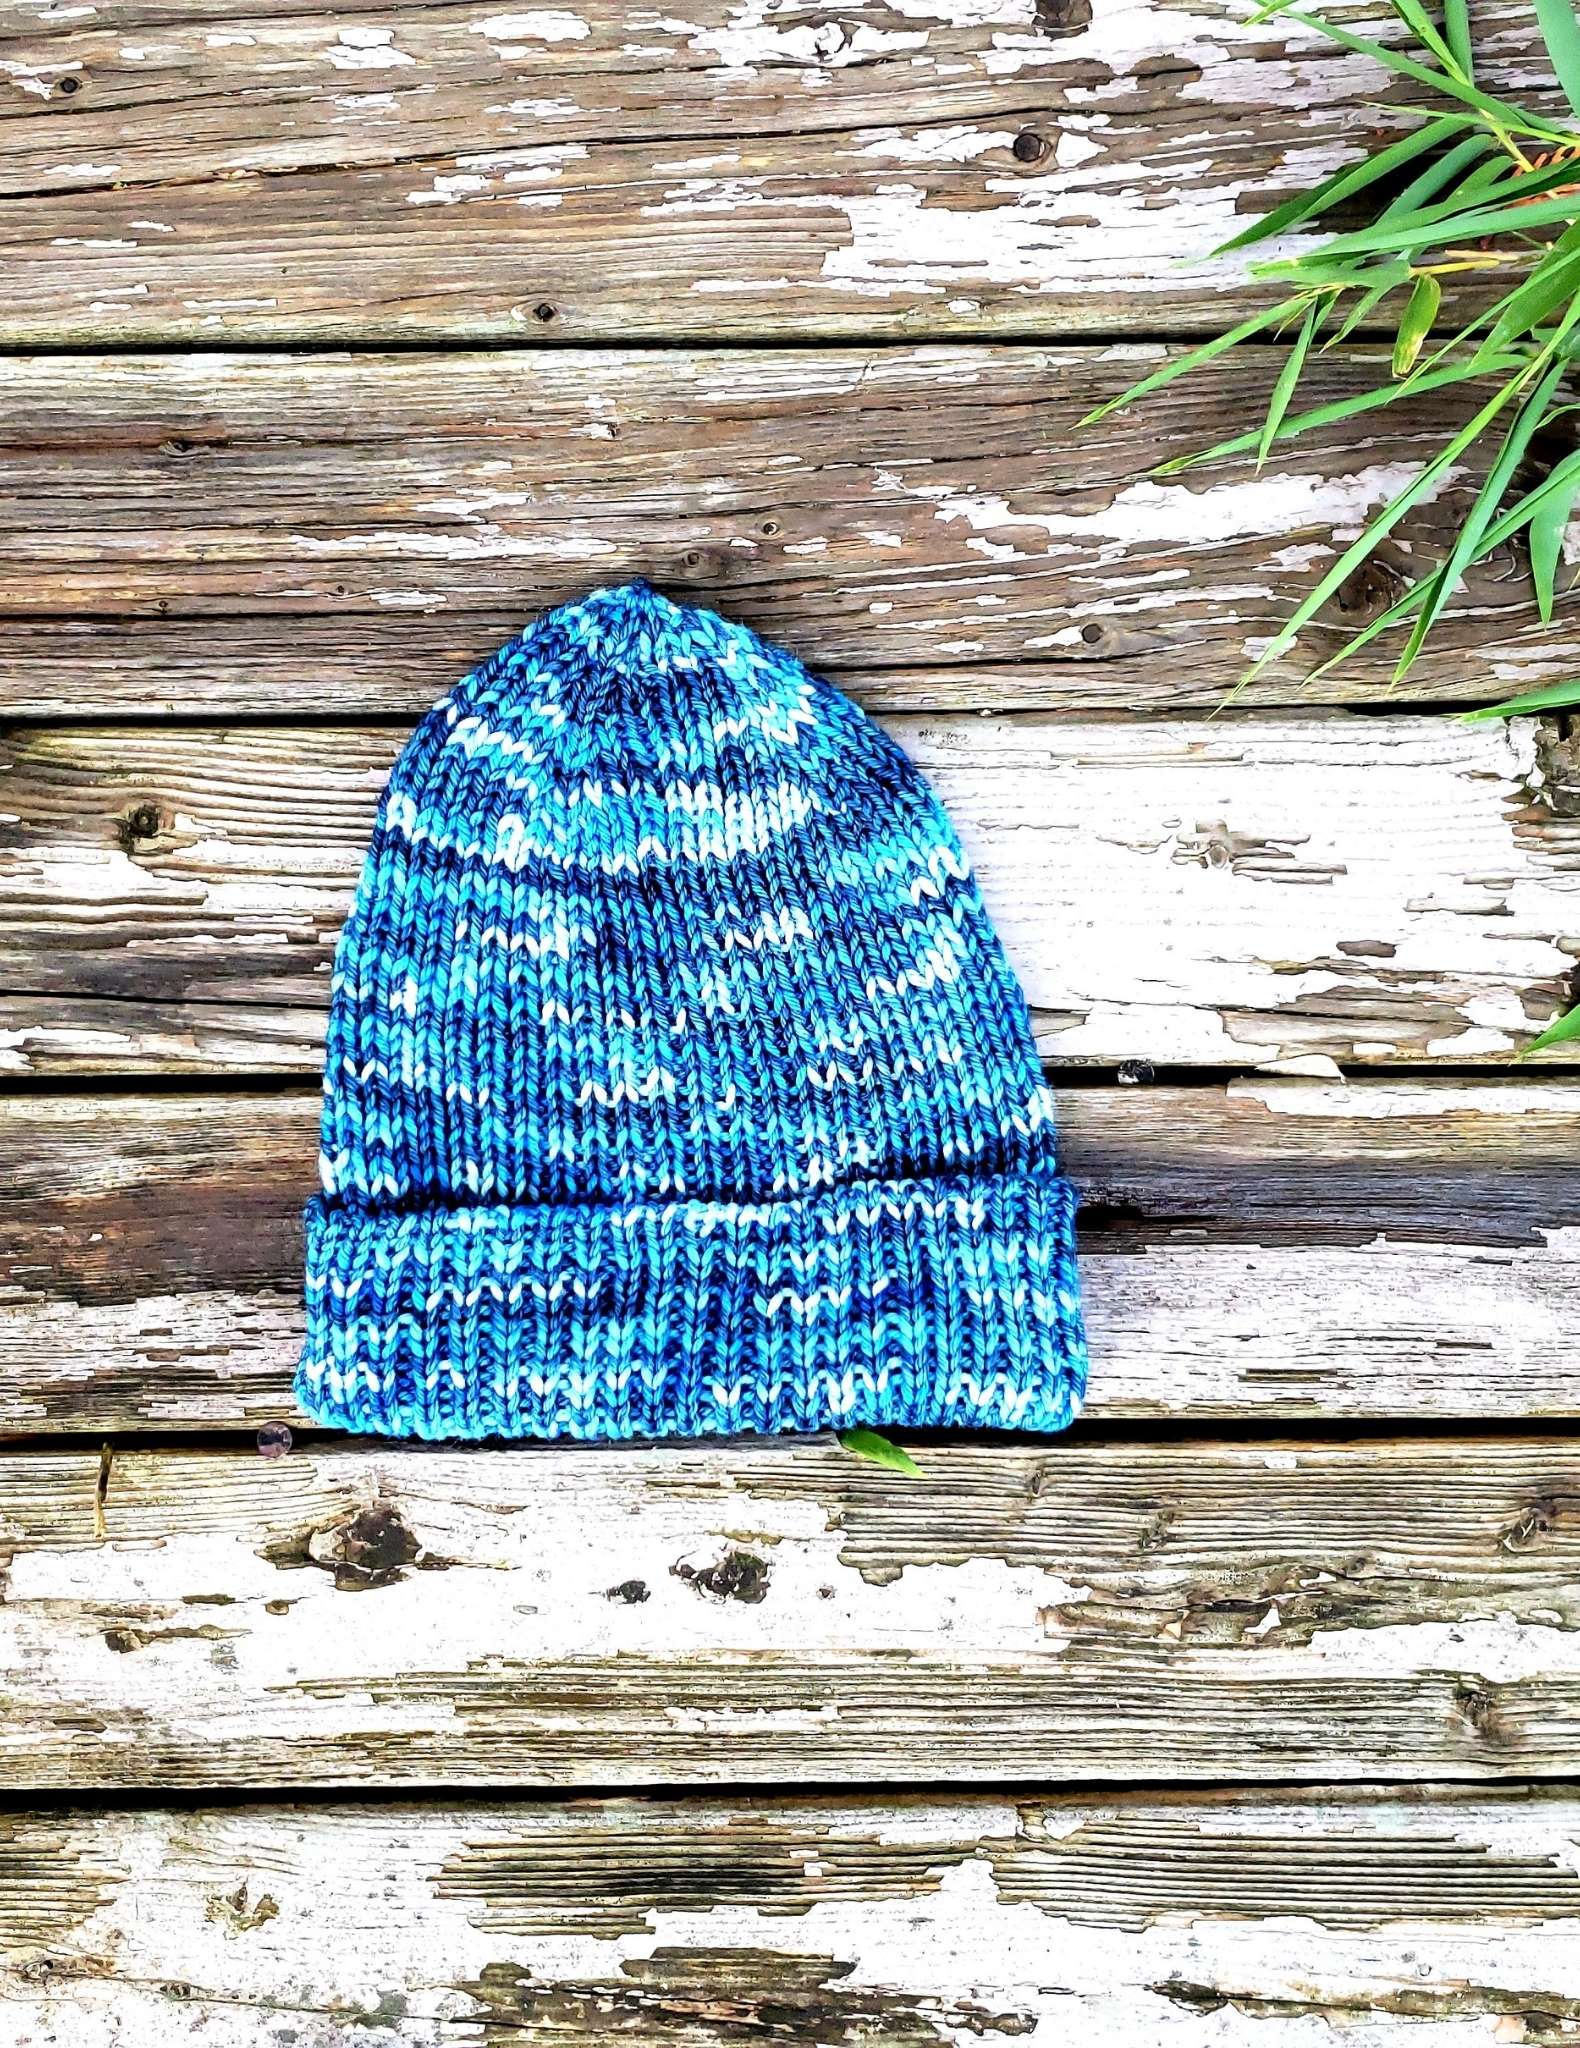 A variegated bright blue ribbed hat is photographed on a worn wood floor.